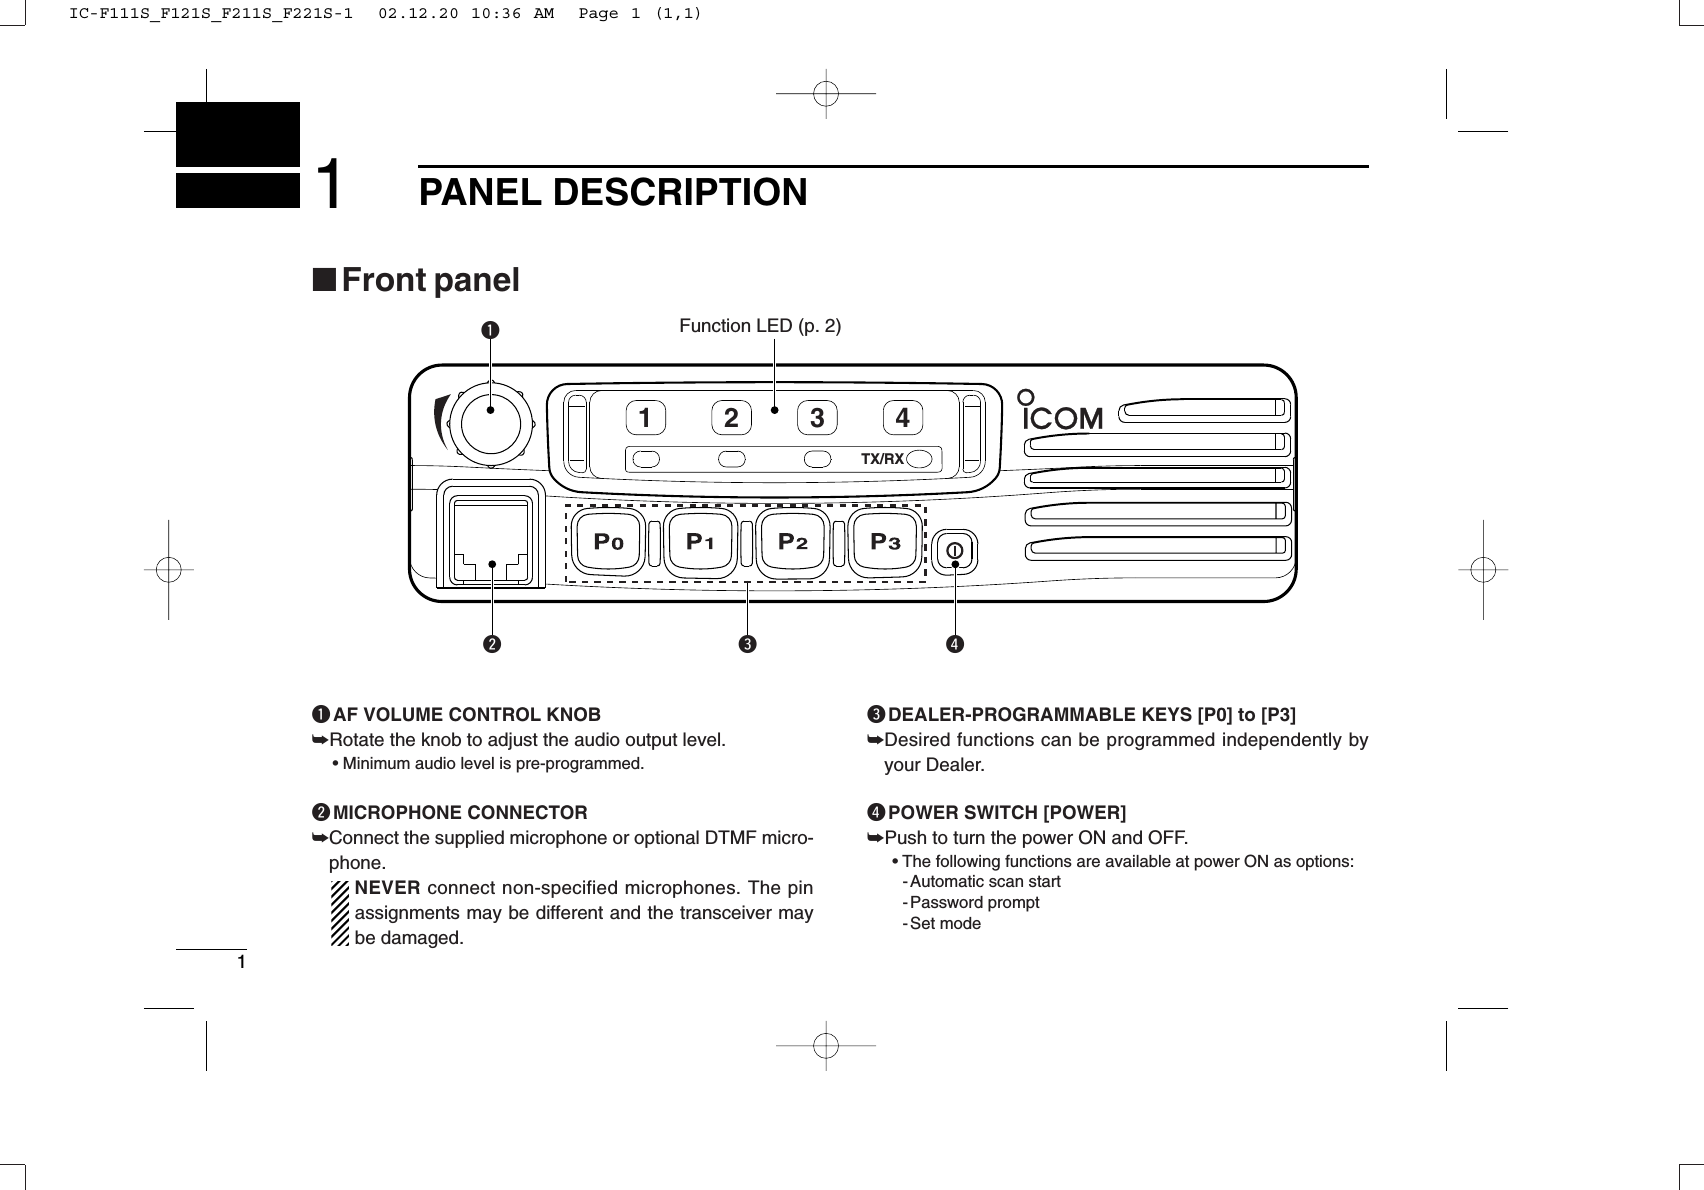 11PANEL DESCRIPTIONTX/RX1234qwerFunction LED (p. 2)■Front panelqAF VOLUME CONTROL KNOB➥Rotate the knob to adjust the audio output level.• Minimum audio level is pre-programmed.wMICROPHONE CONNECTOR➥Connect the supplied microphone or optional DTMF micro-phone.NEVER connect non-specified microphones. The pinassignments may be different and the transceiver maybe damaged.eDEALER-PROGRAMMABLE KEYS [P0] to [P3]➥Desired functions can be programmed independently byyour Dealer.rPOWER SWITCH [POWER]➥Push to turn the power ON and OFF.• The following functions are available at power ON as options:- Automatic scan start- Password prompt- Set modeIC-F111S_F121S_F211S_F221S-1  02.12.20 10:36 AM  Page 1 (1,1)